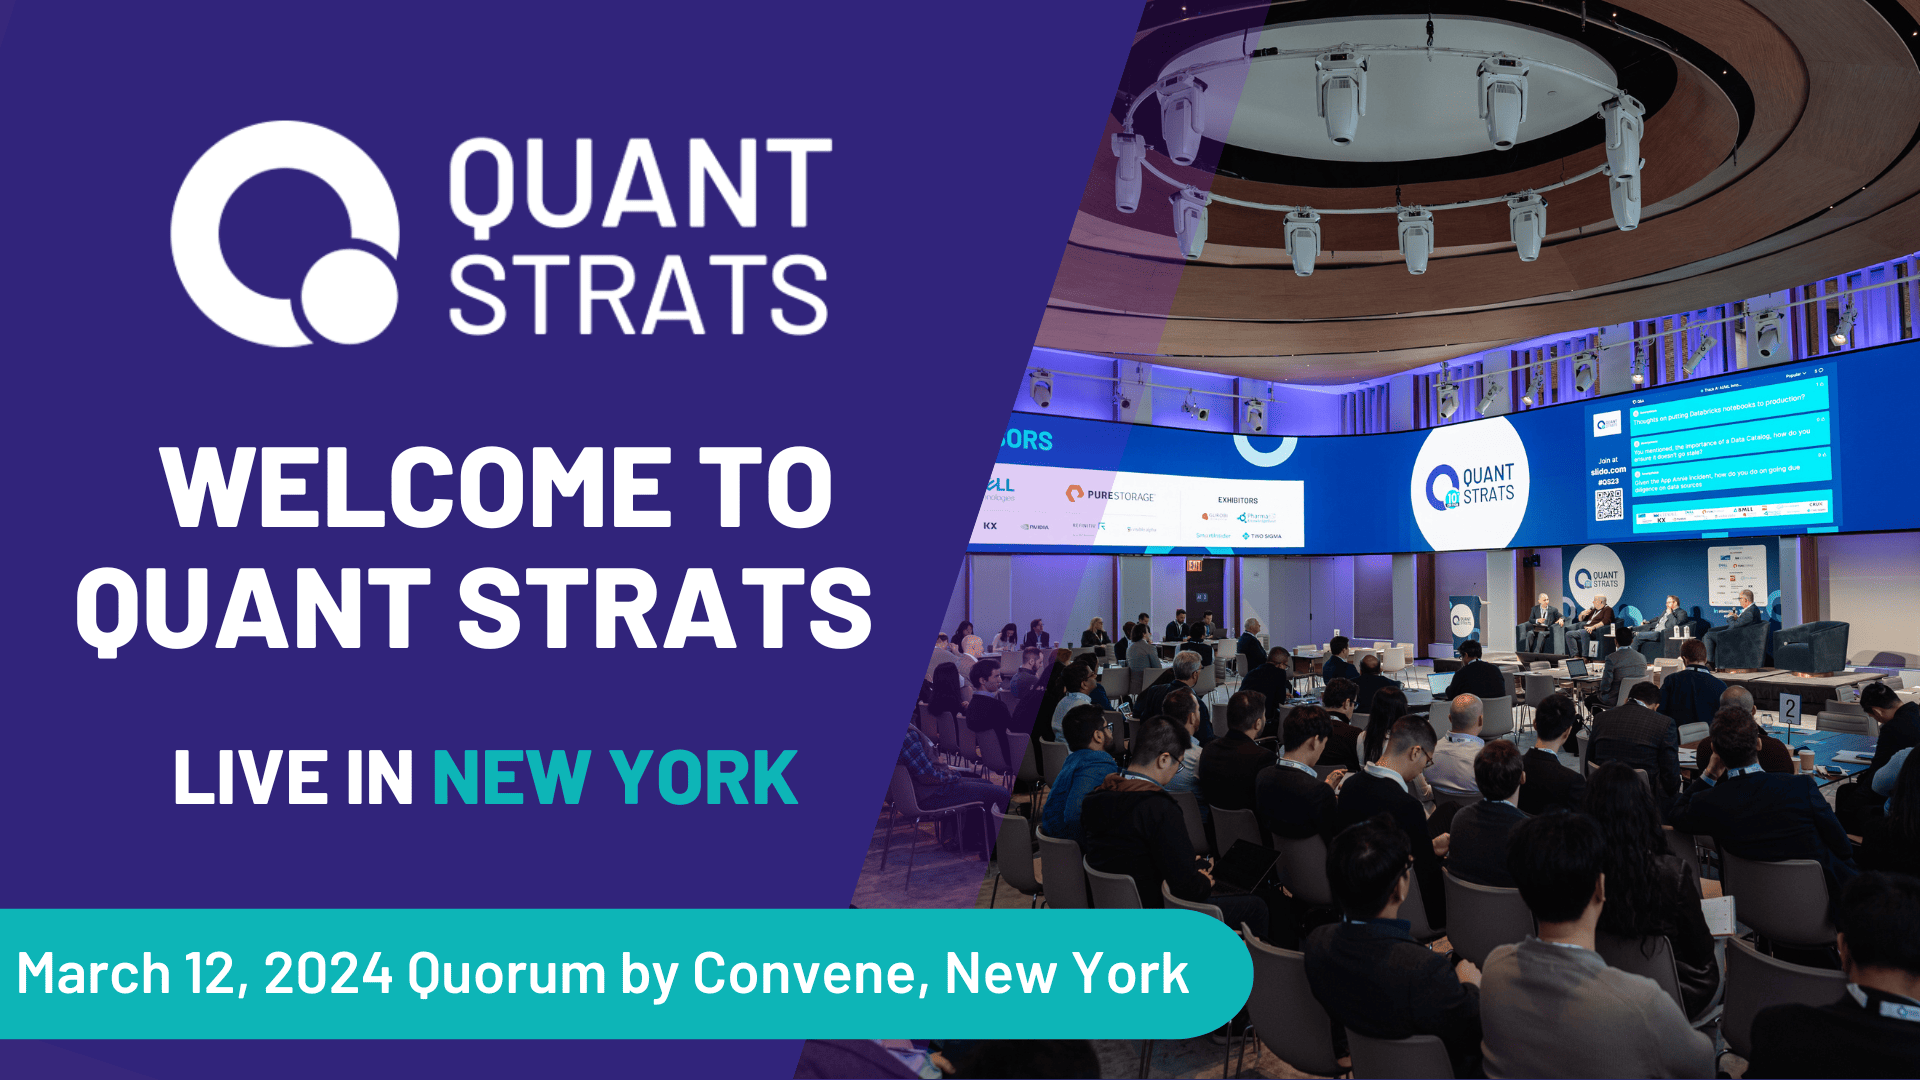 Quant Strats New York 2024 organized by Quant Strats